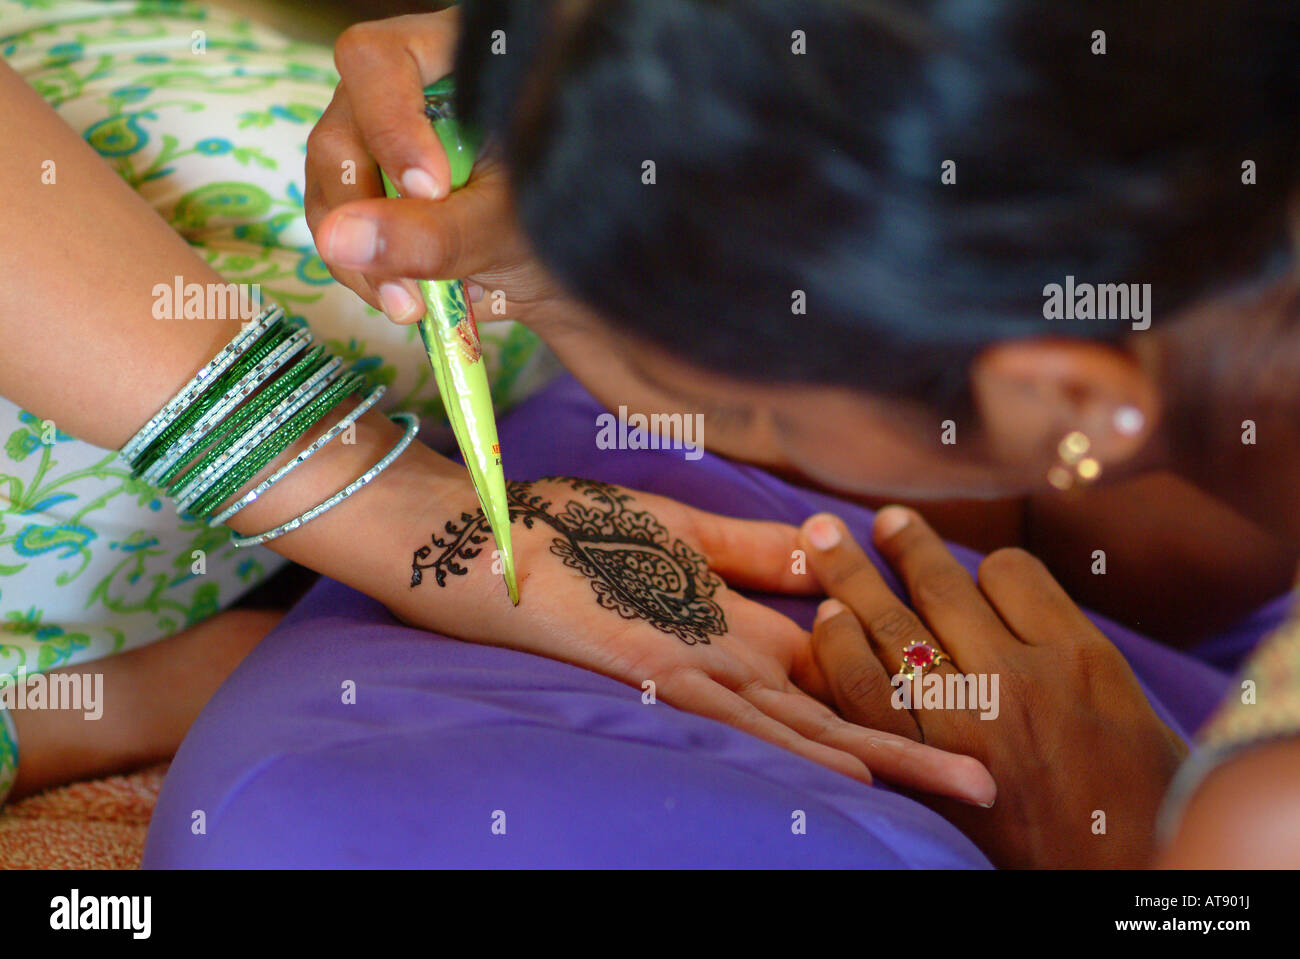 Woman receiving a mendhi ( henna dye ) design  on her hand prior to her indian wedding ceremony Stock Photo